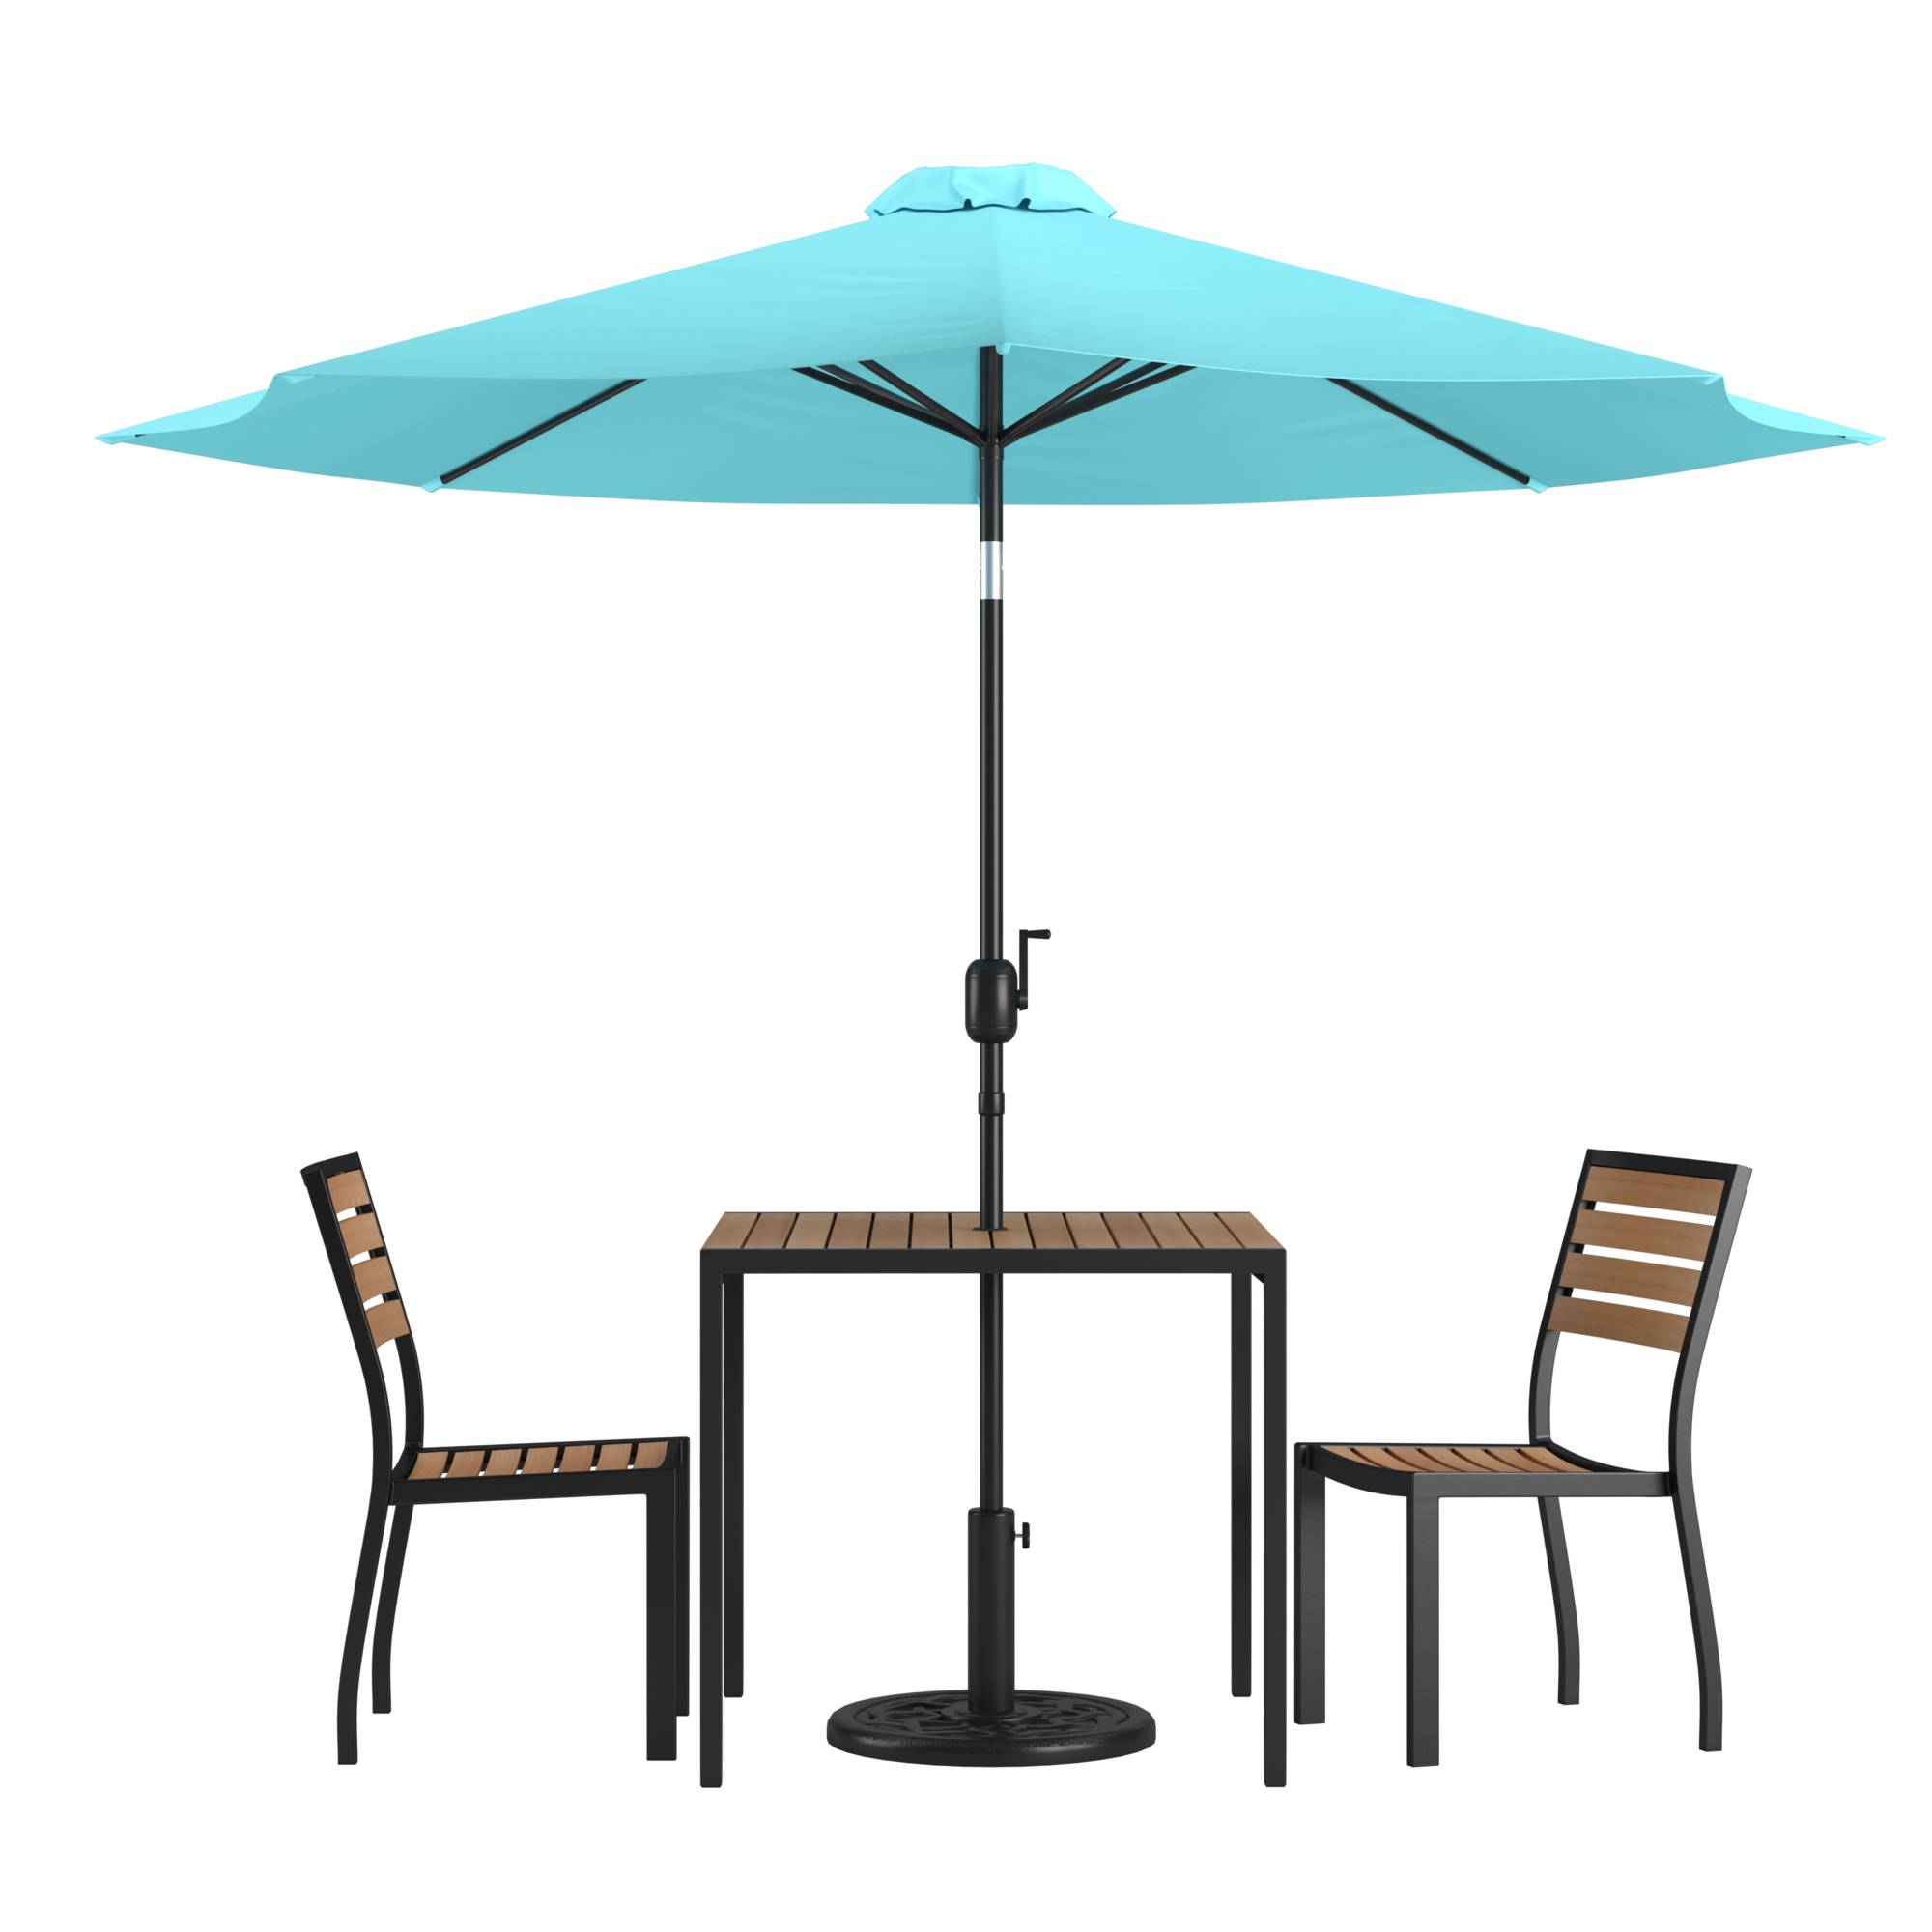 Flash Furniture, Faux Teak 35Inch Table-Teal Umbrella-Base-2 Chairs, Pieces (qty.) 5, Primary Color Blue, Seating Capacity 2, Model XU8132UB19BTL